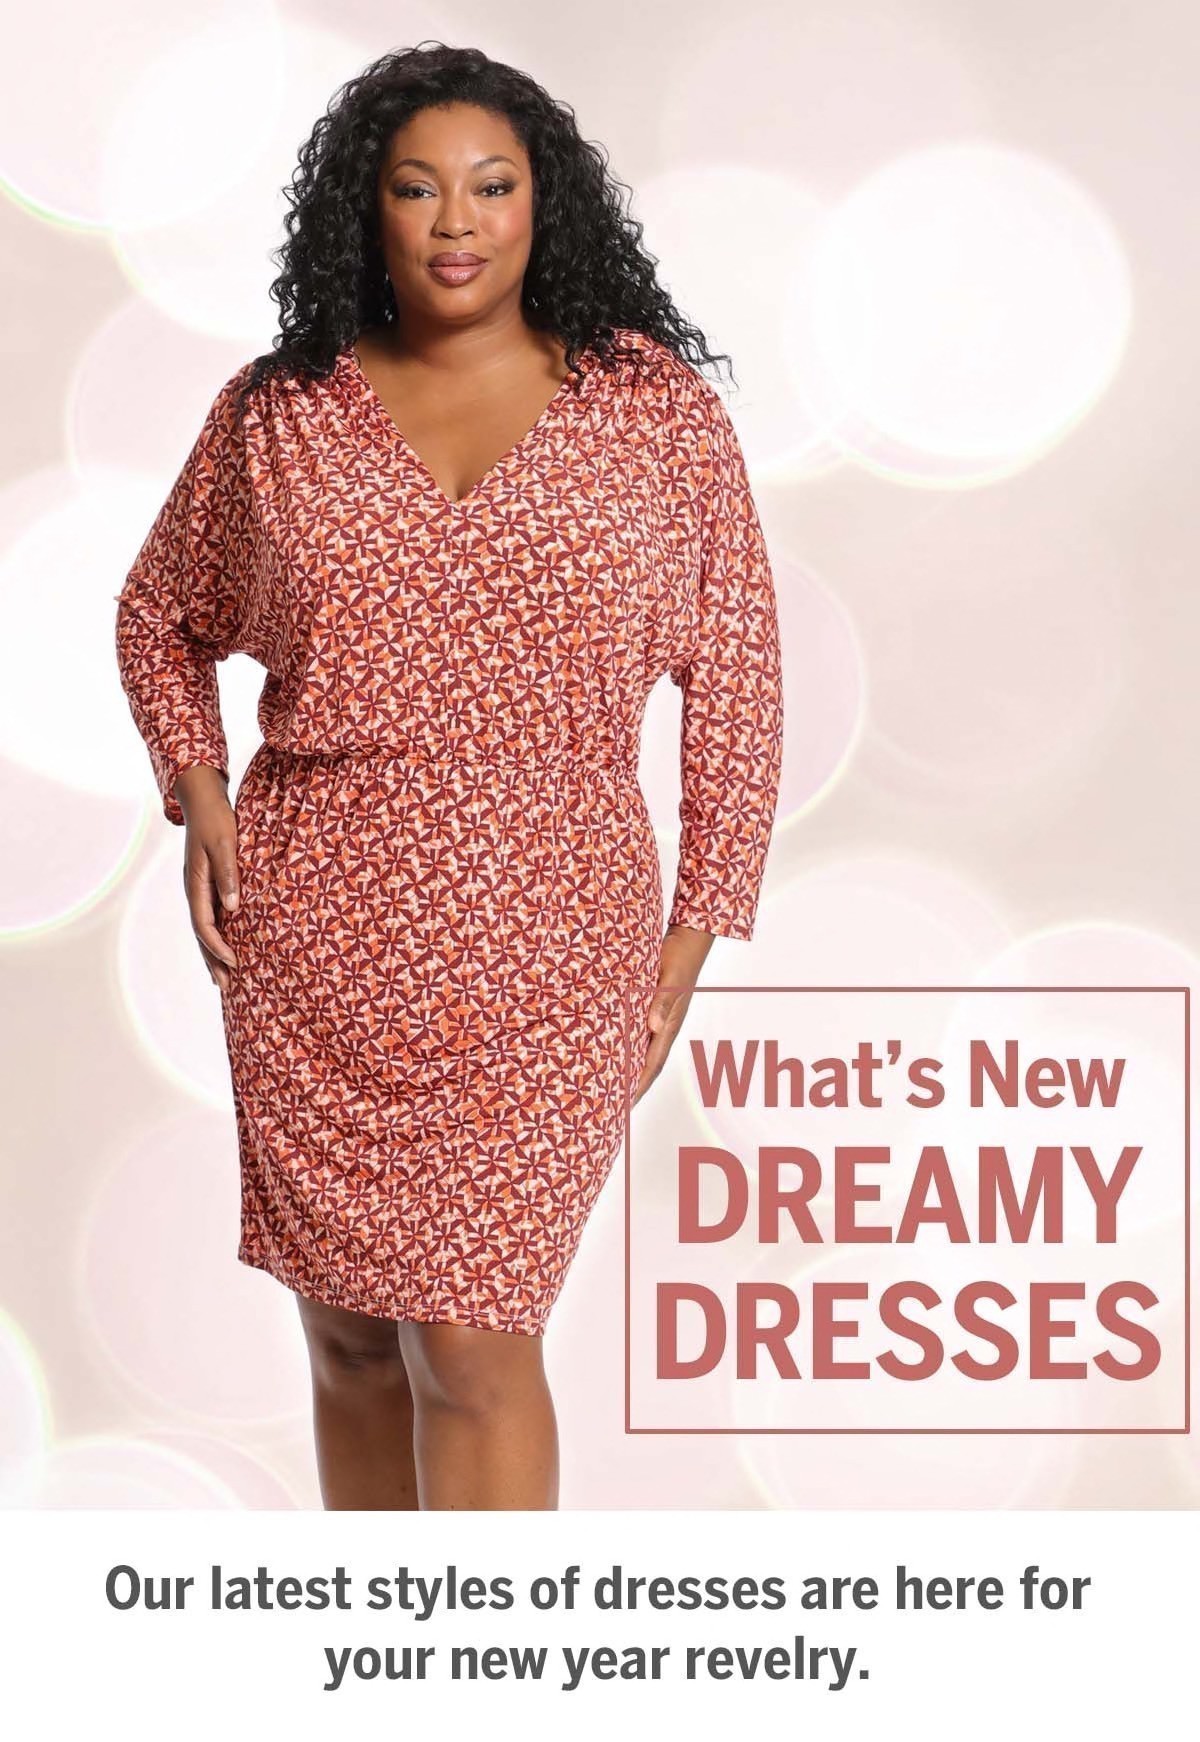 NEW ARRIVALS - Up to 70% off! – DressBarn